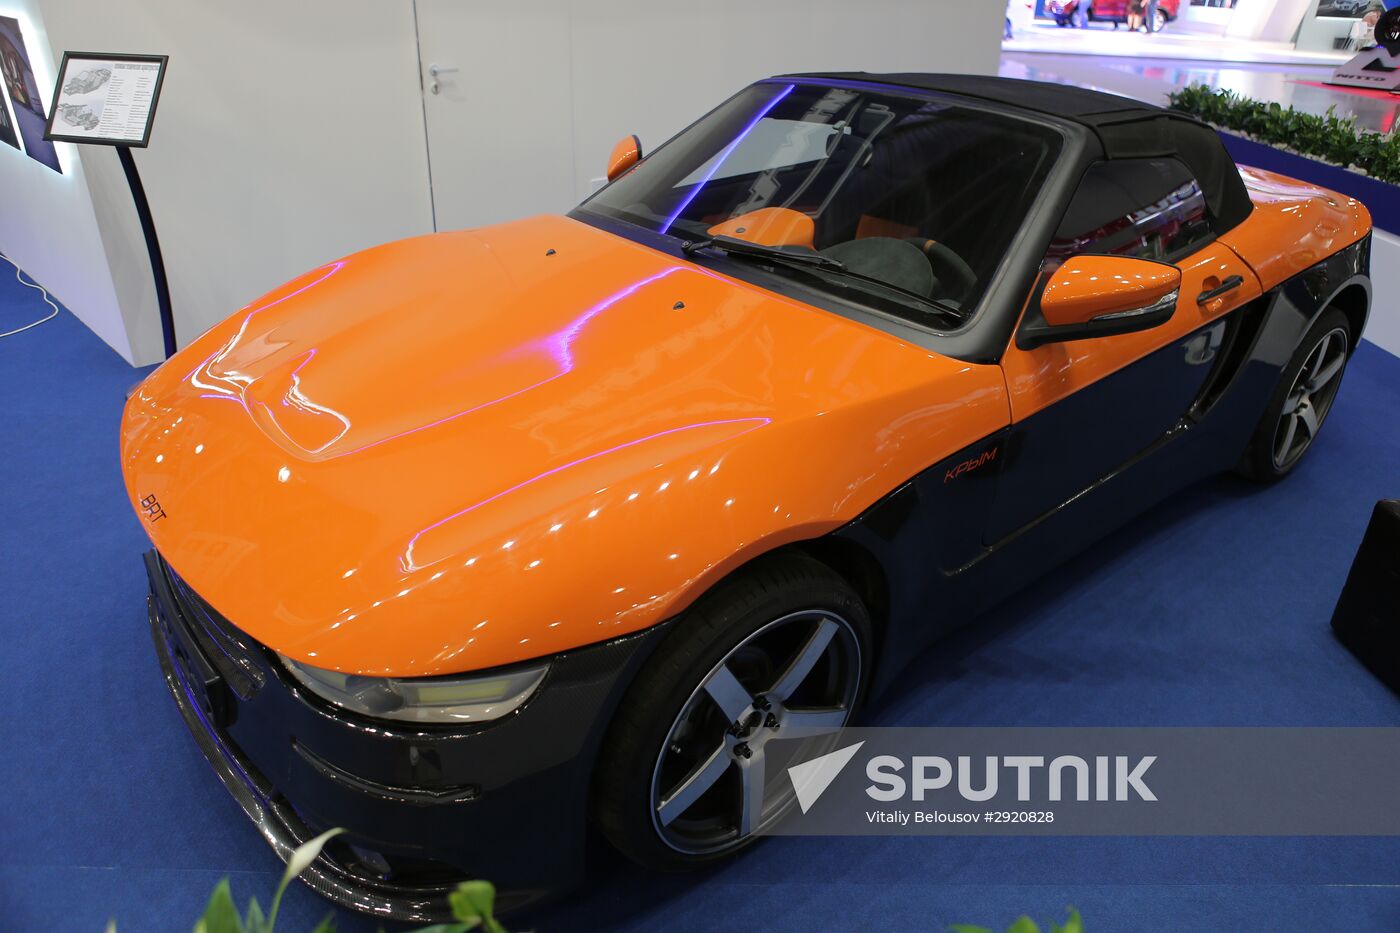 Moscow International Automobile Salon. Day two